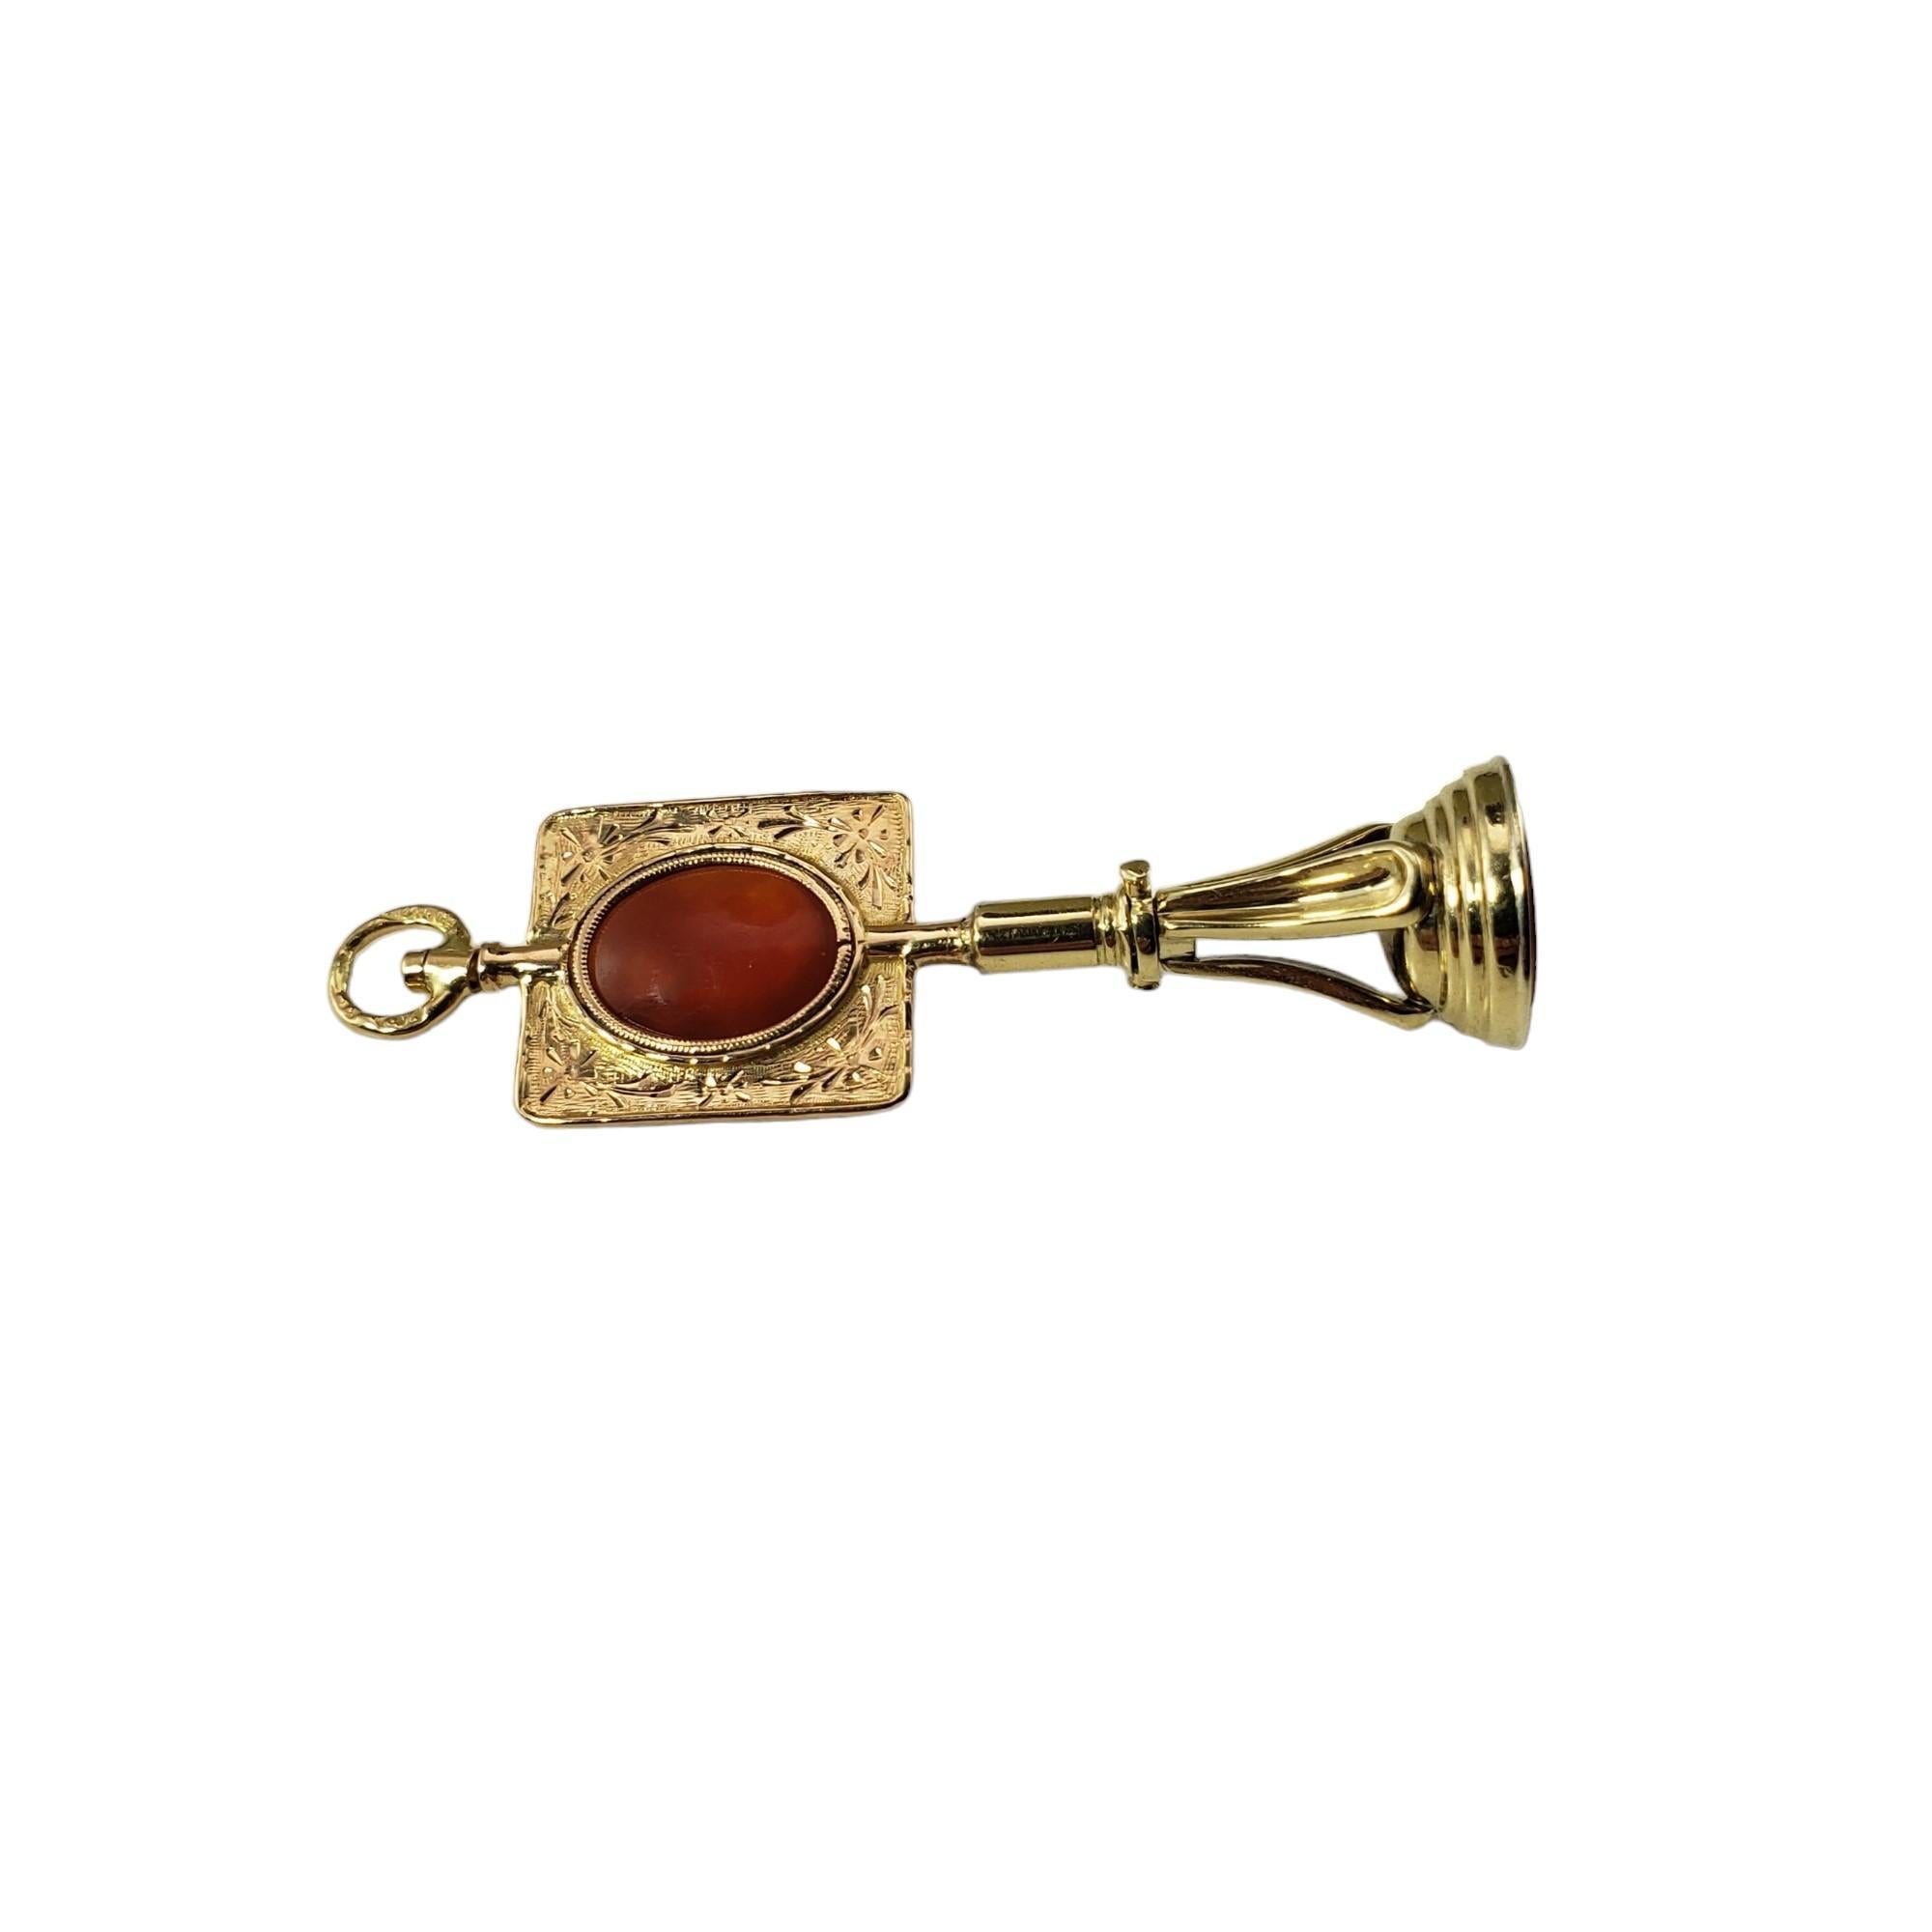 Oval Cut  14 Karat Yellow Gold and Carnelian Fob Pendant #15725 For Sale